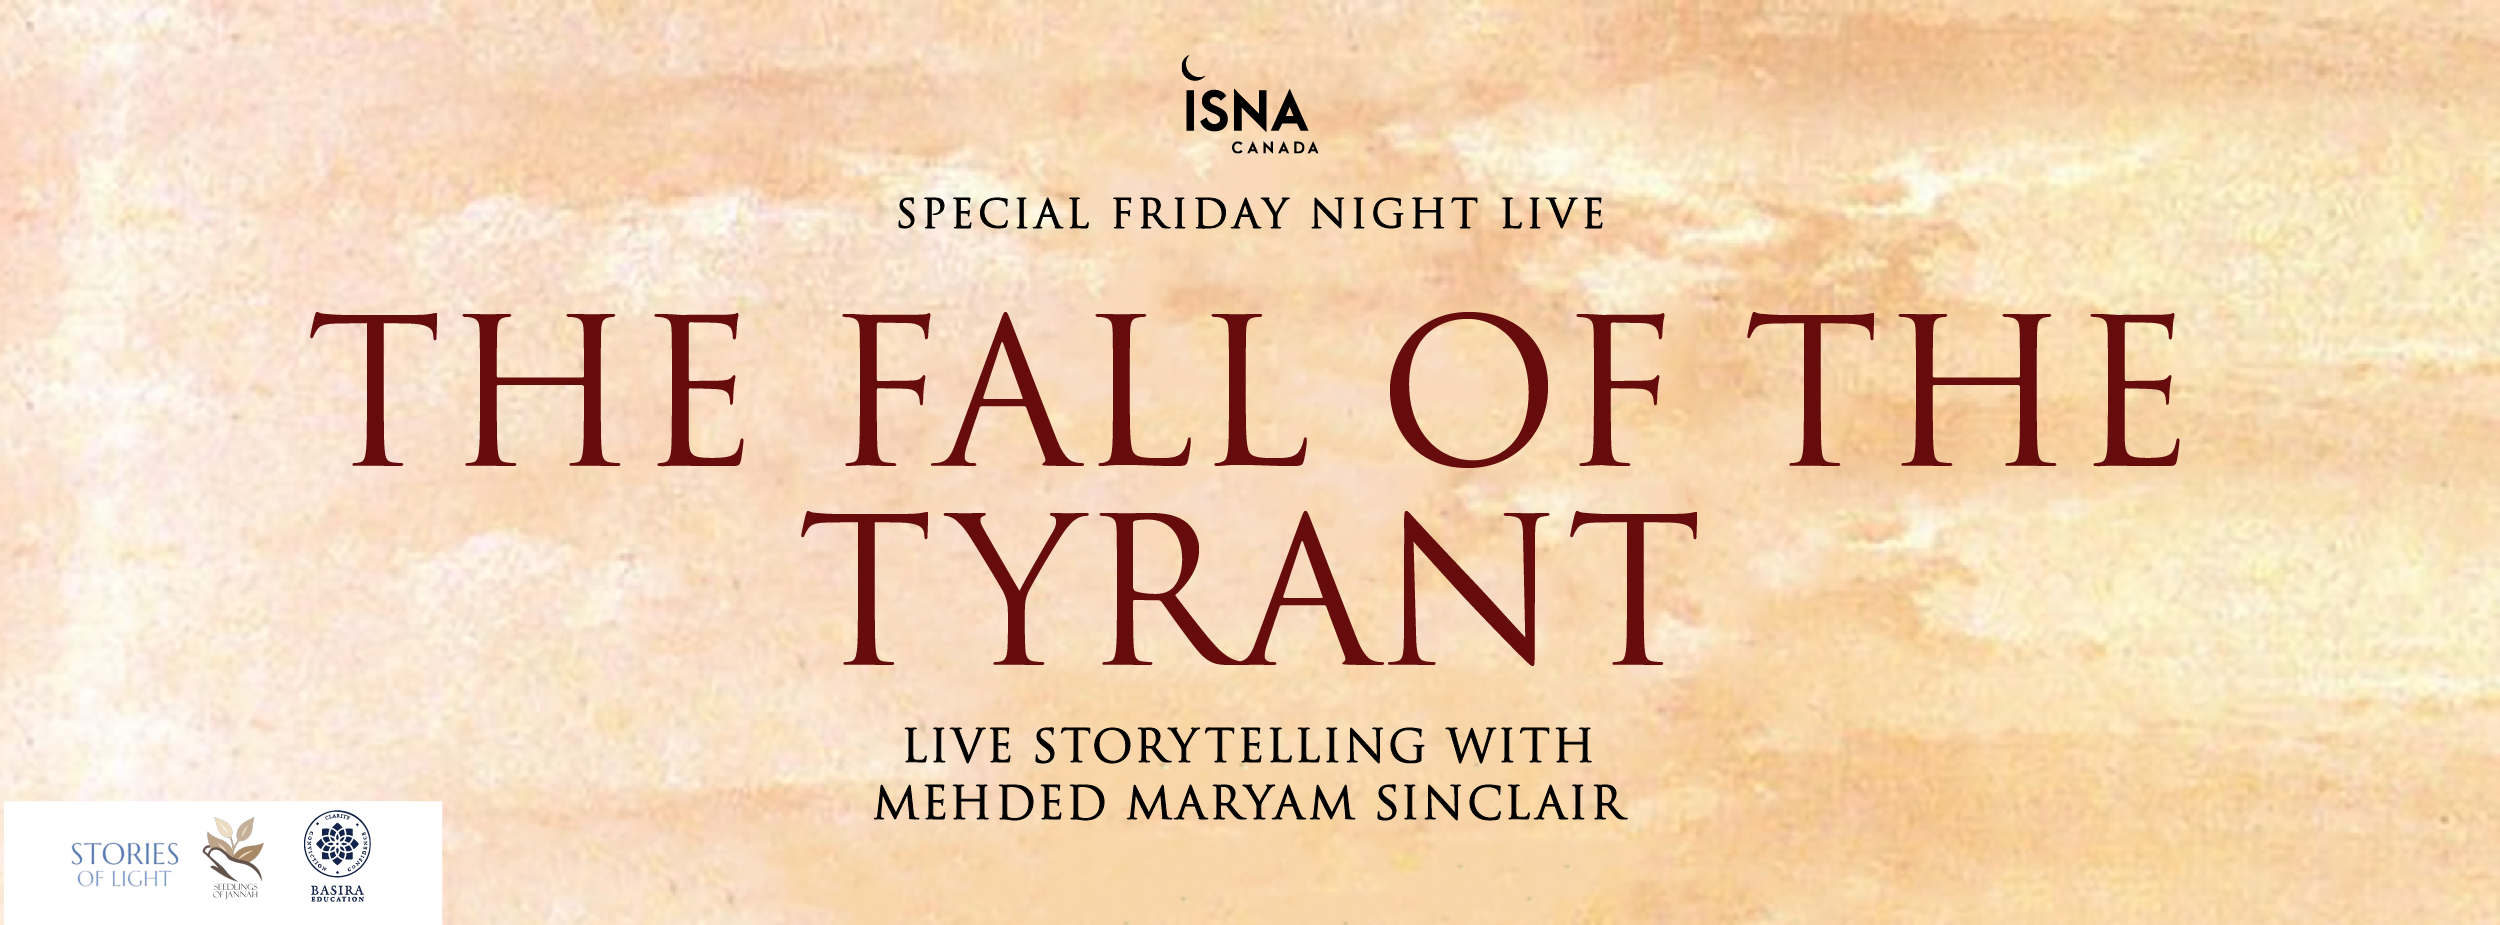 ISNA Canada The Fall of the Tyrant  Storytelling by Mehded Maryam Sinclair